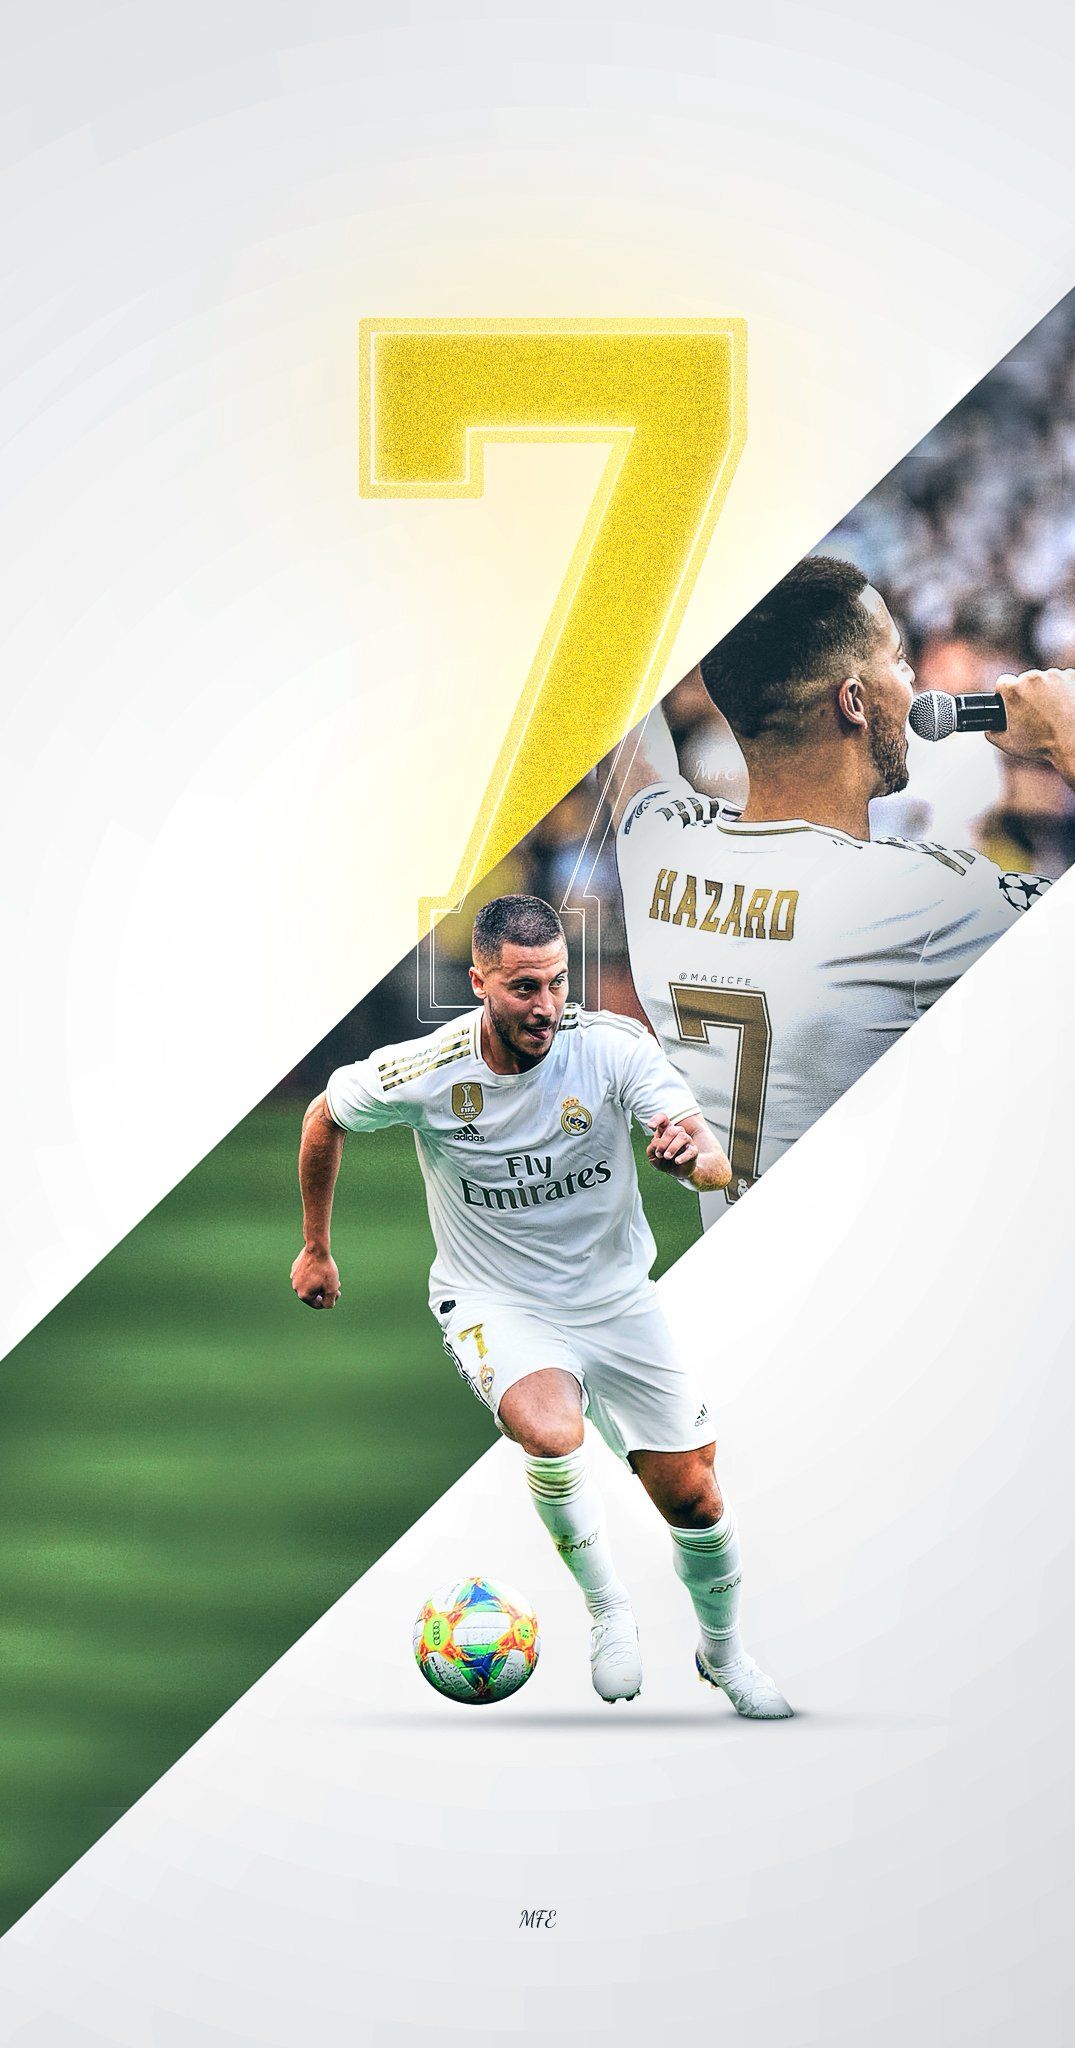 Wallpapers Real Madrid posted by Samantha Anderson